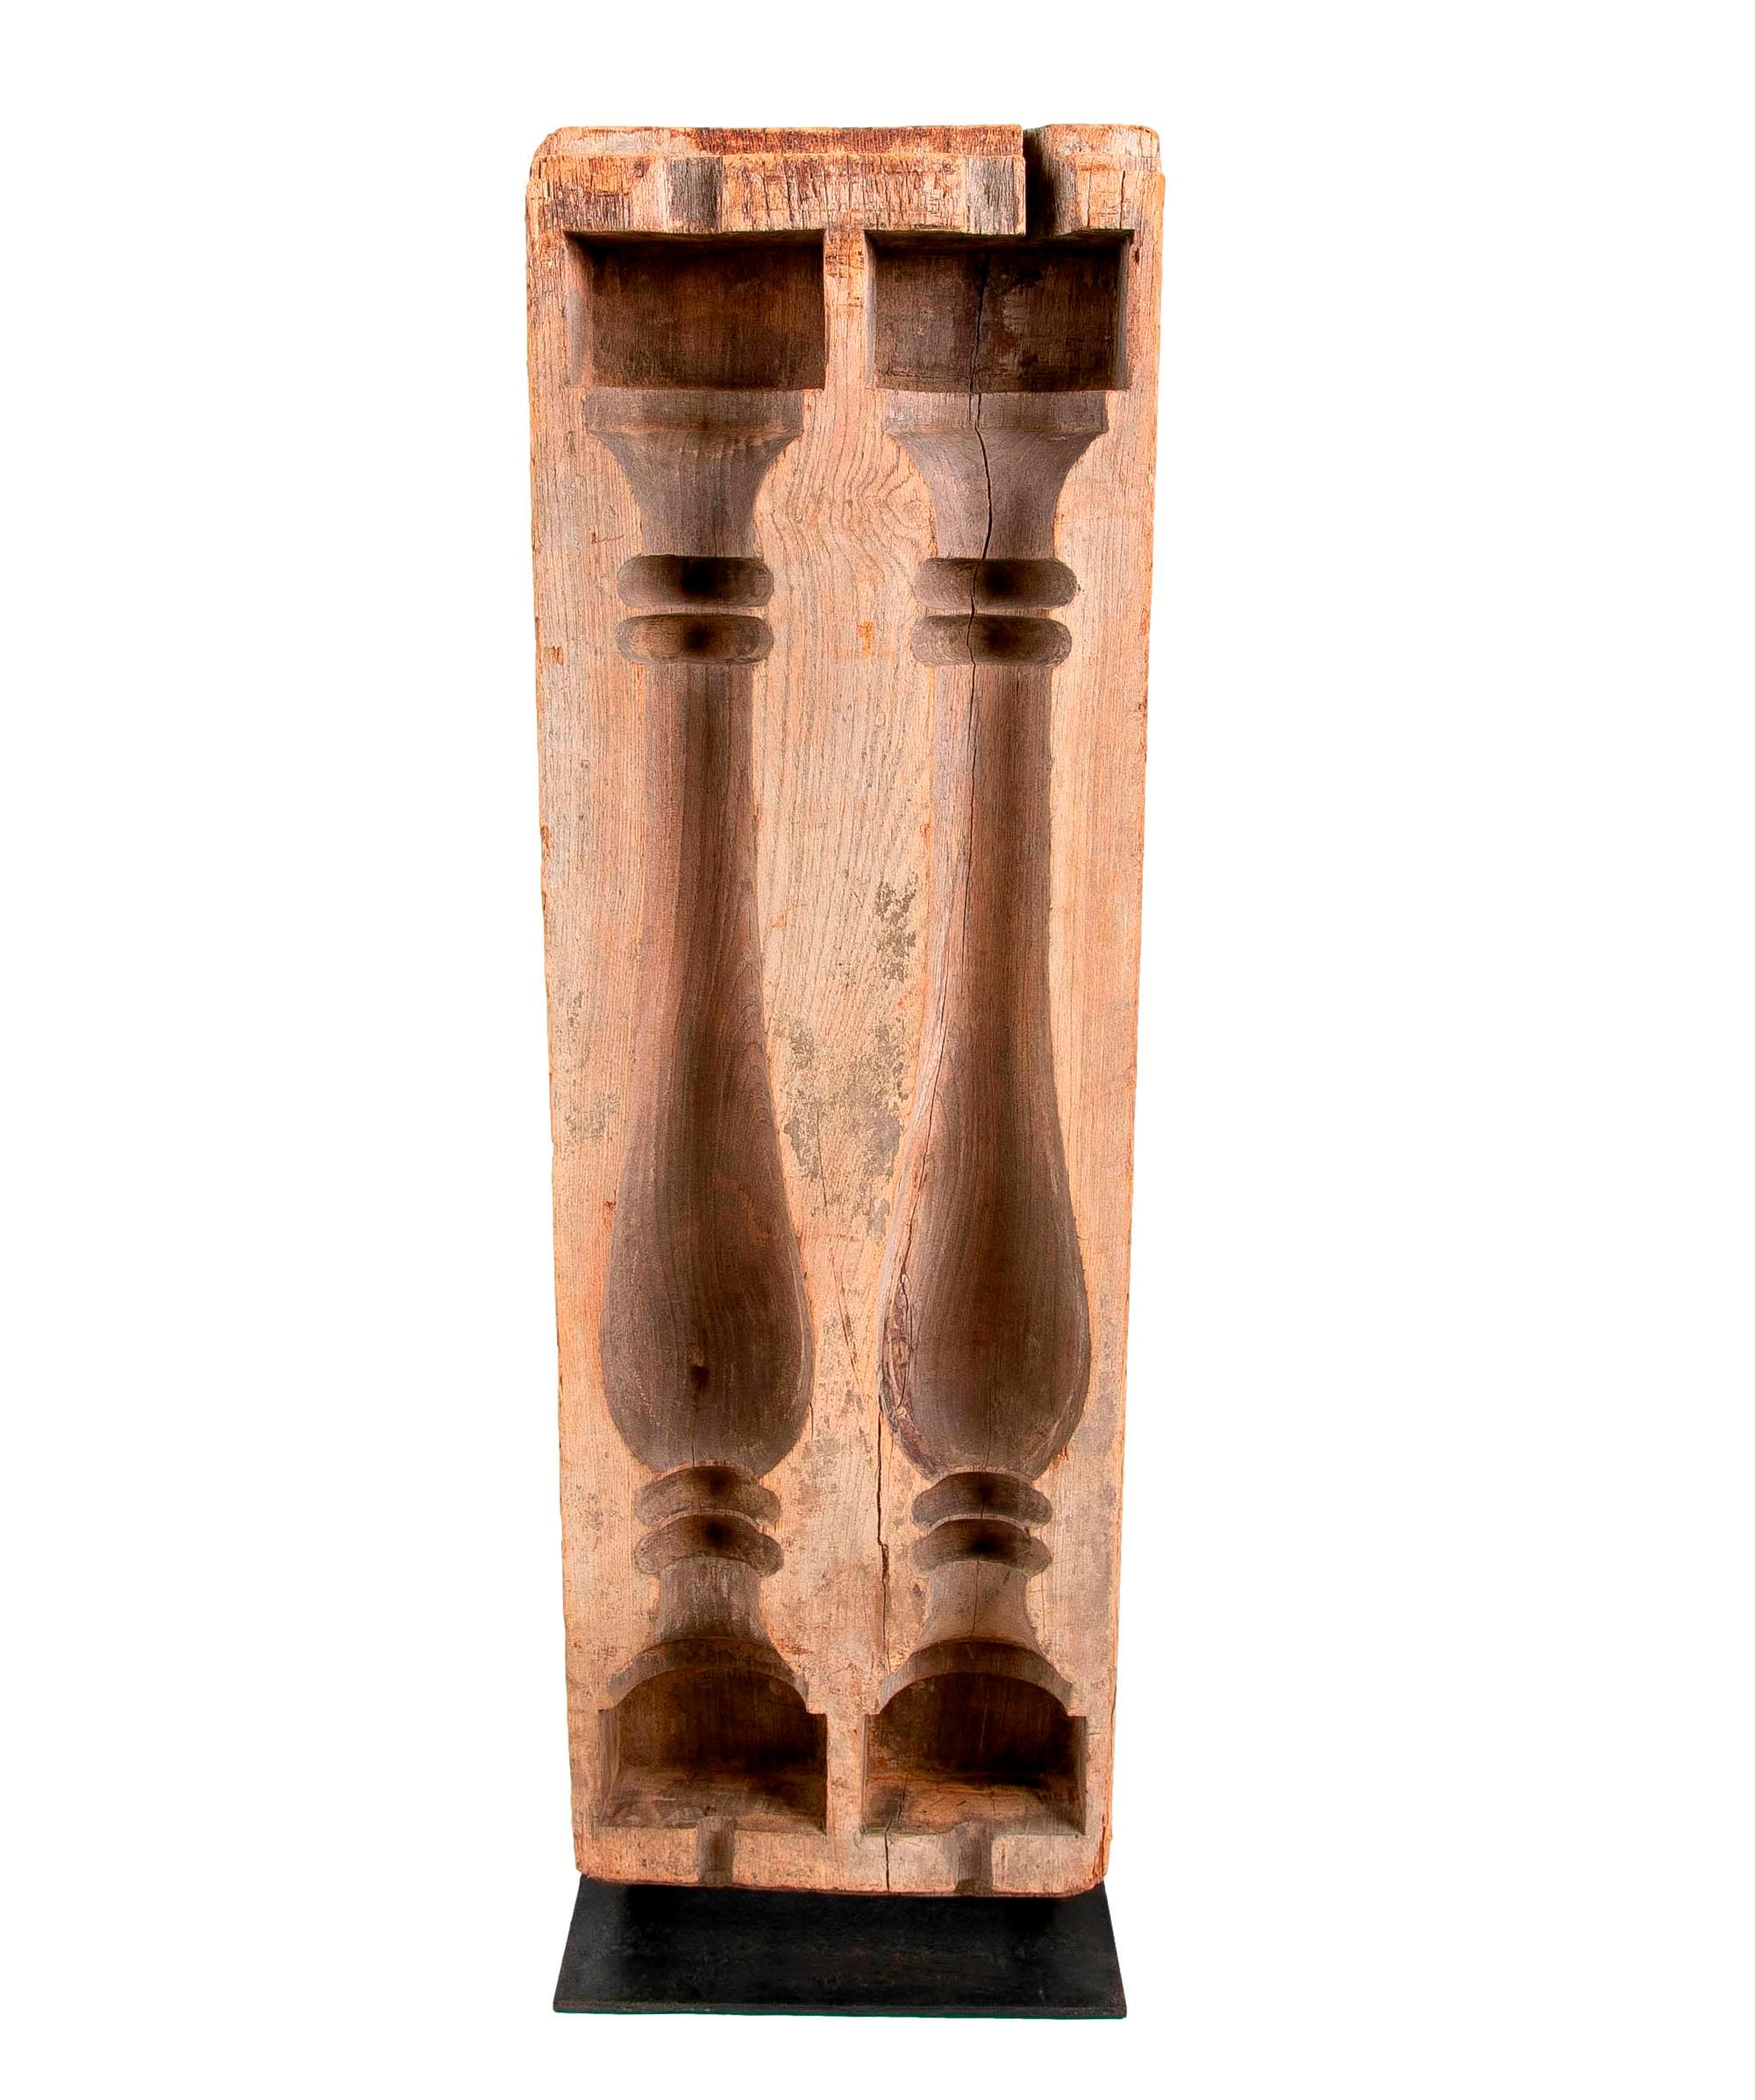 Wooden Mould for Manufacturing Original Balustrades with Decorative Iron Base For Sale 2